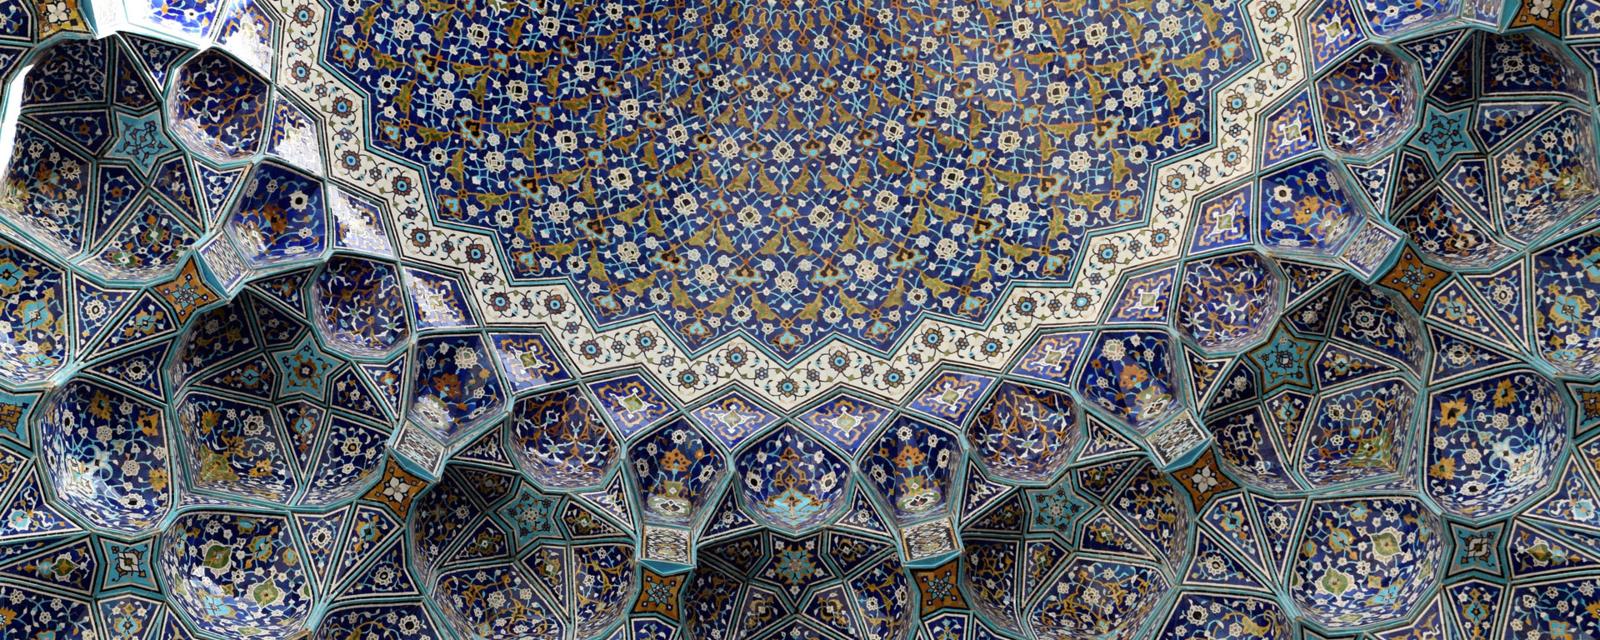 The 10 most beautiful ceilings in the world